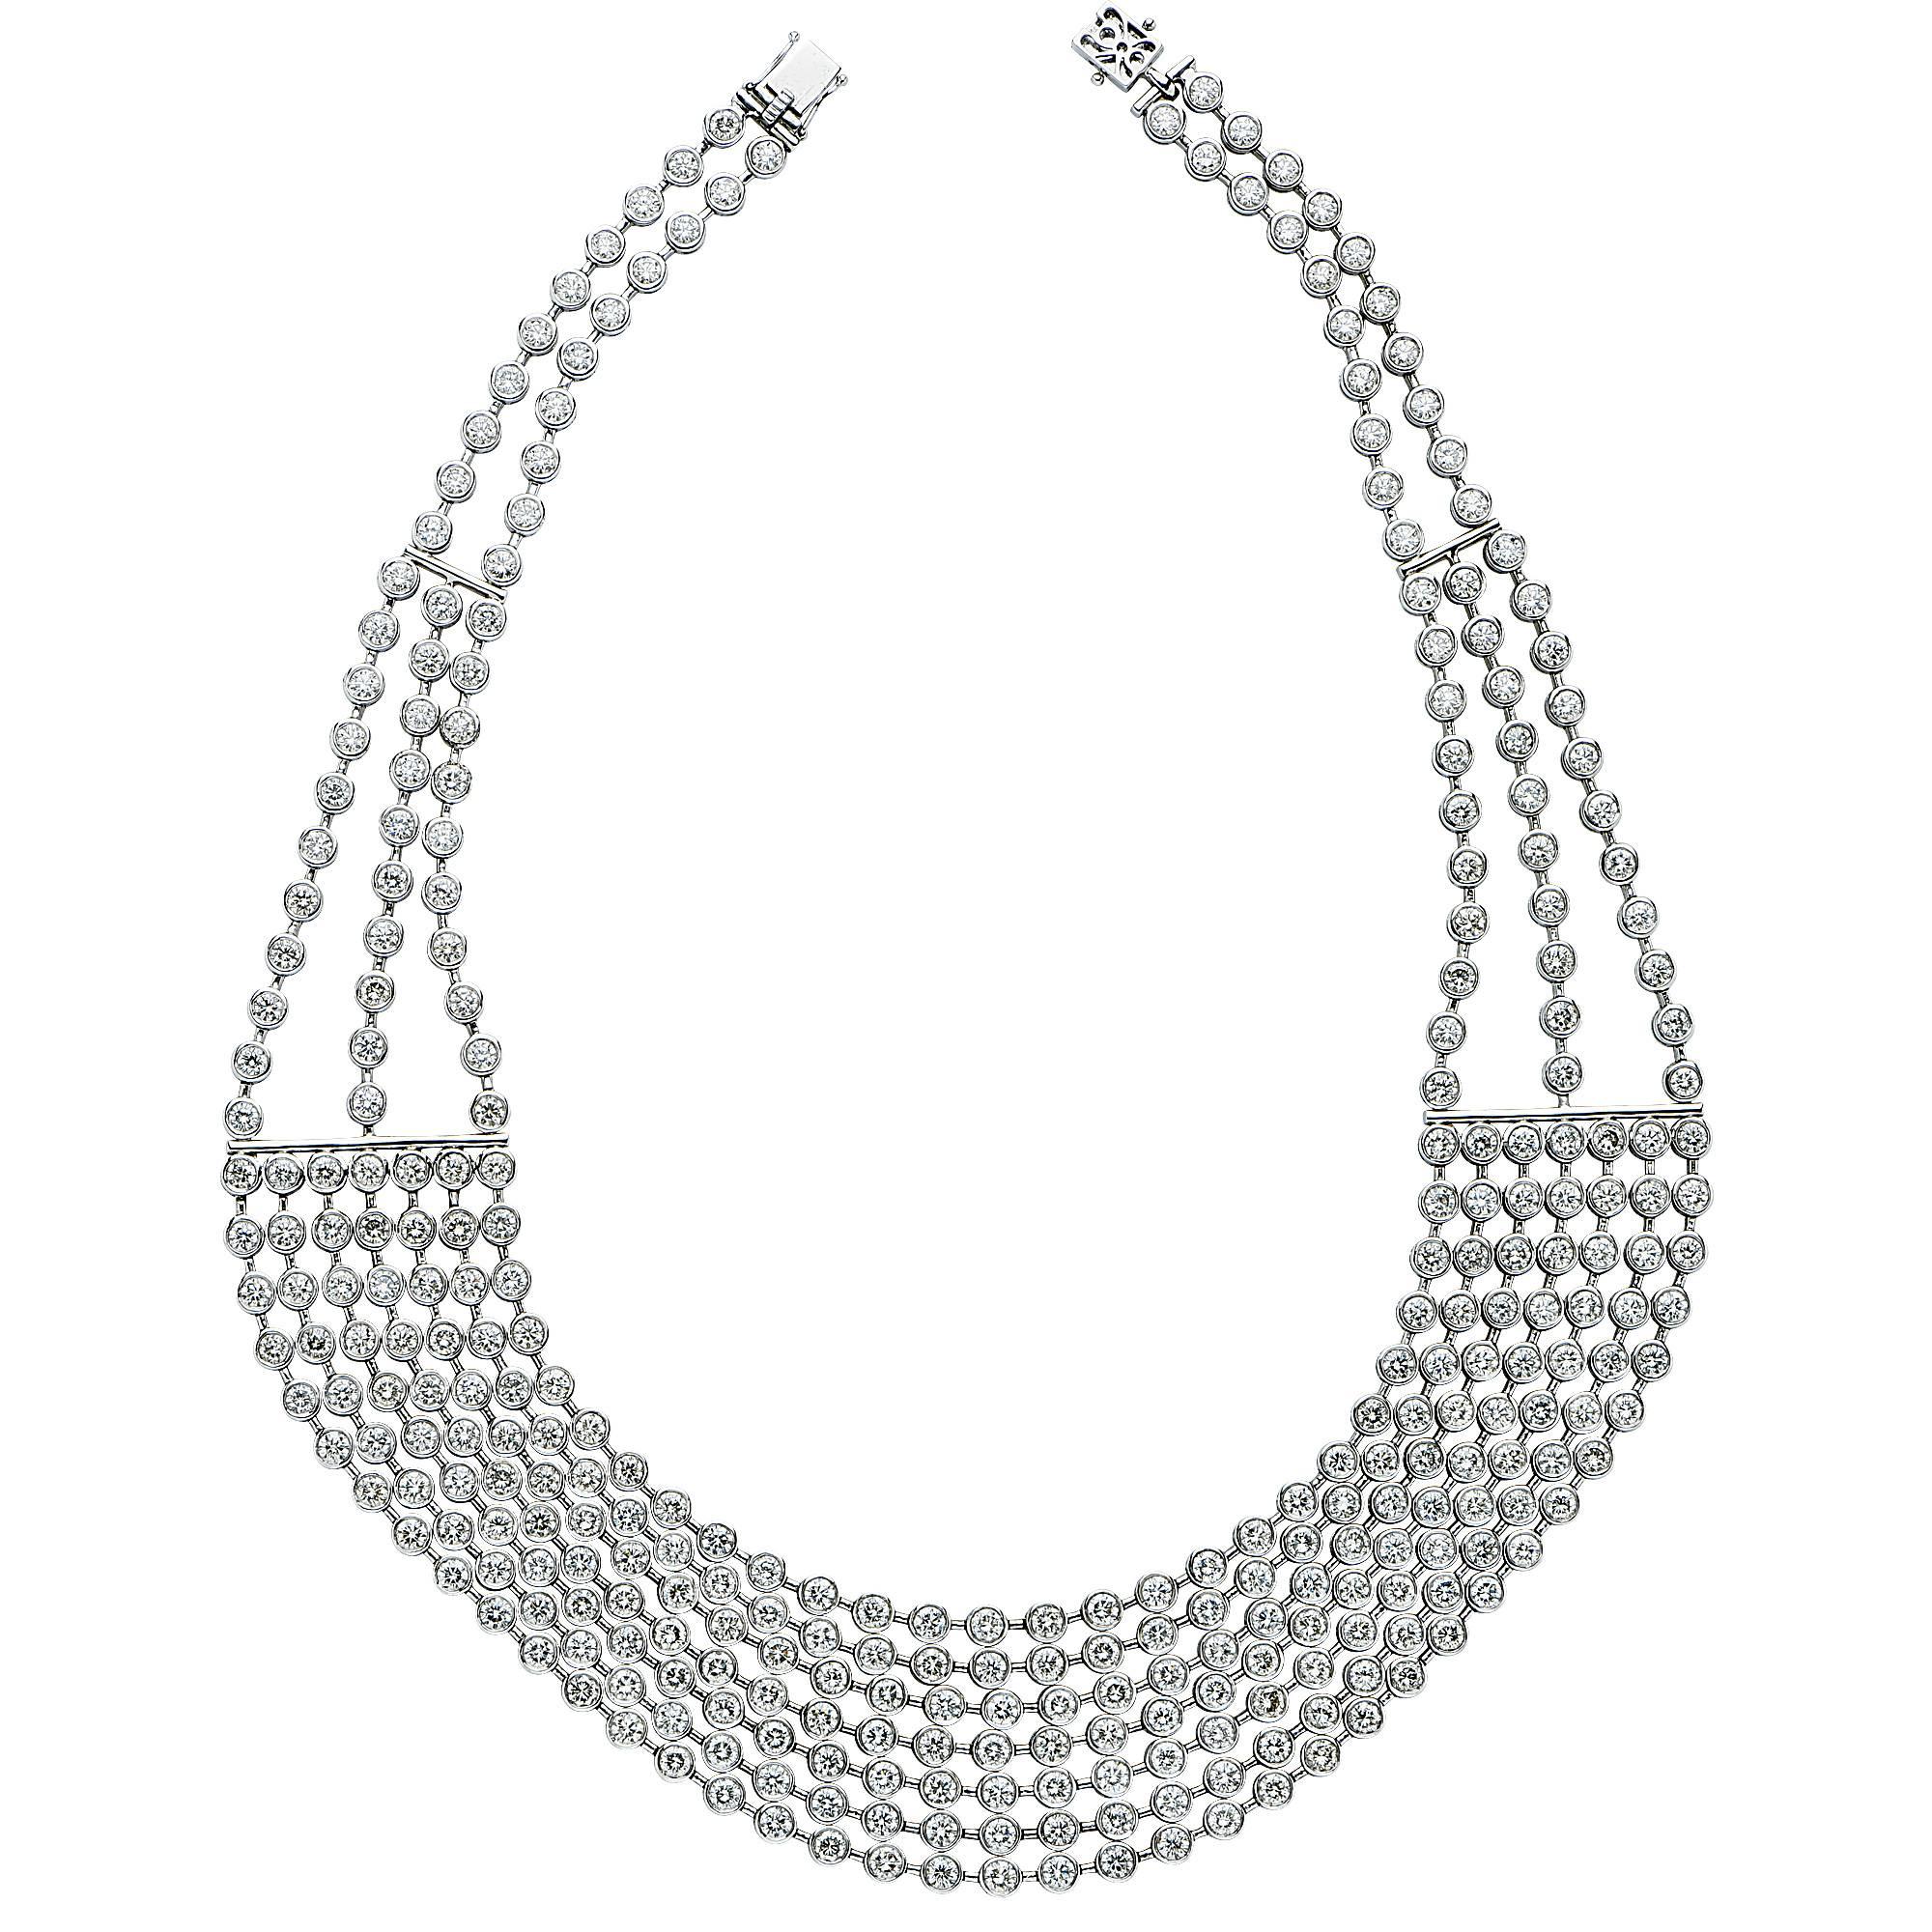 18k white gold necklace containing 333 round brilliant cut diamonds weighing 41.68ct, G color, VS-SI clarity. This gorgeous necklace lies perfectly on the neck.

Metal weight: 110.79 grams

This diamond necklace is accompanied by a retail